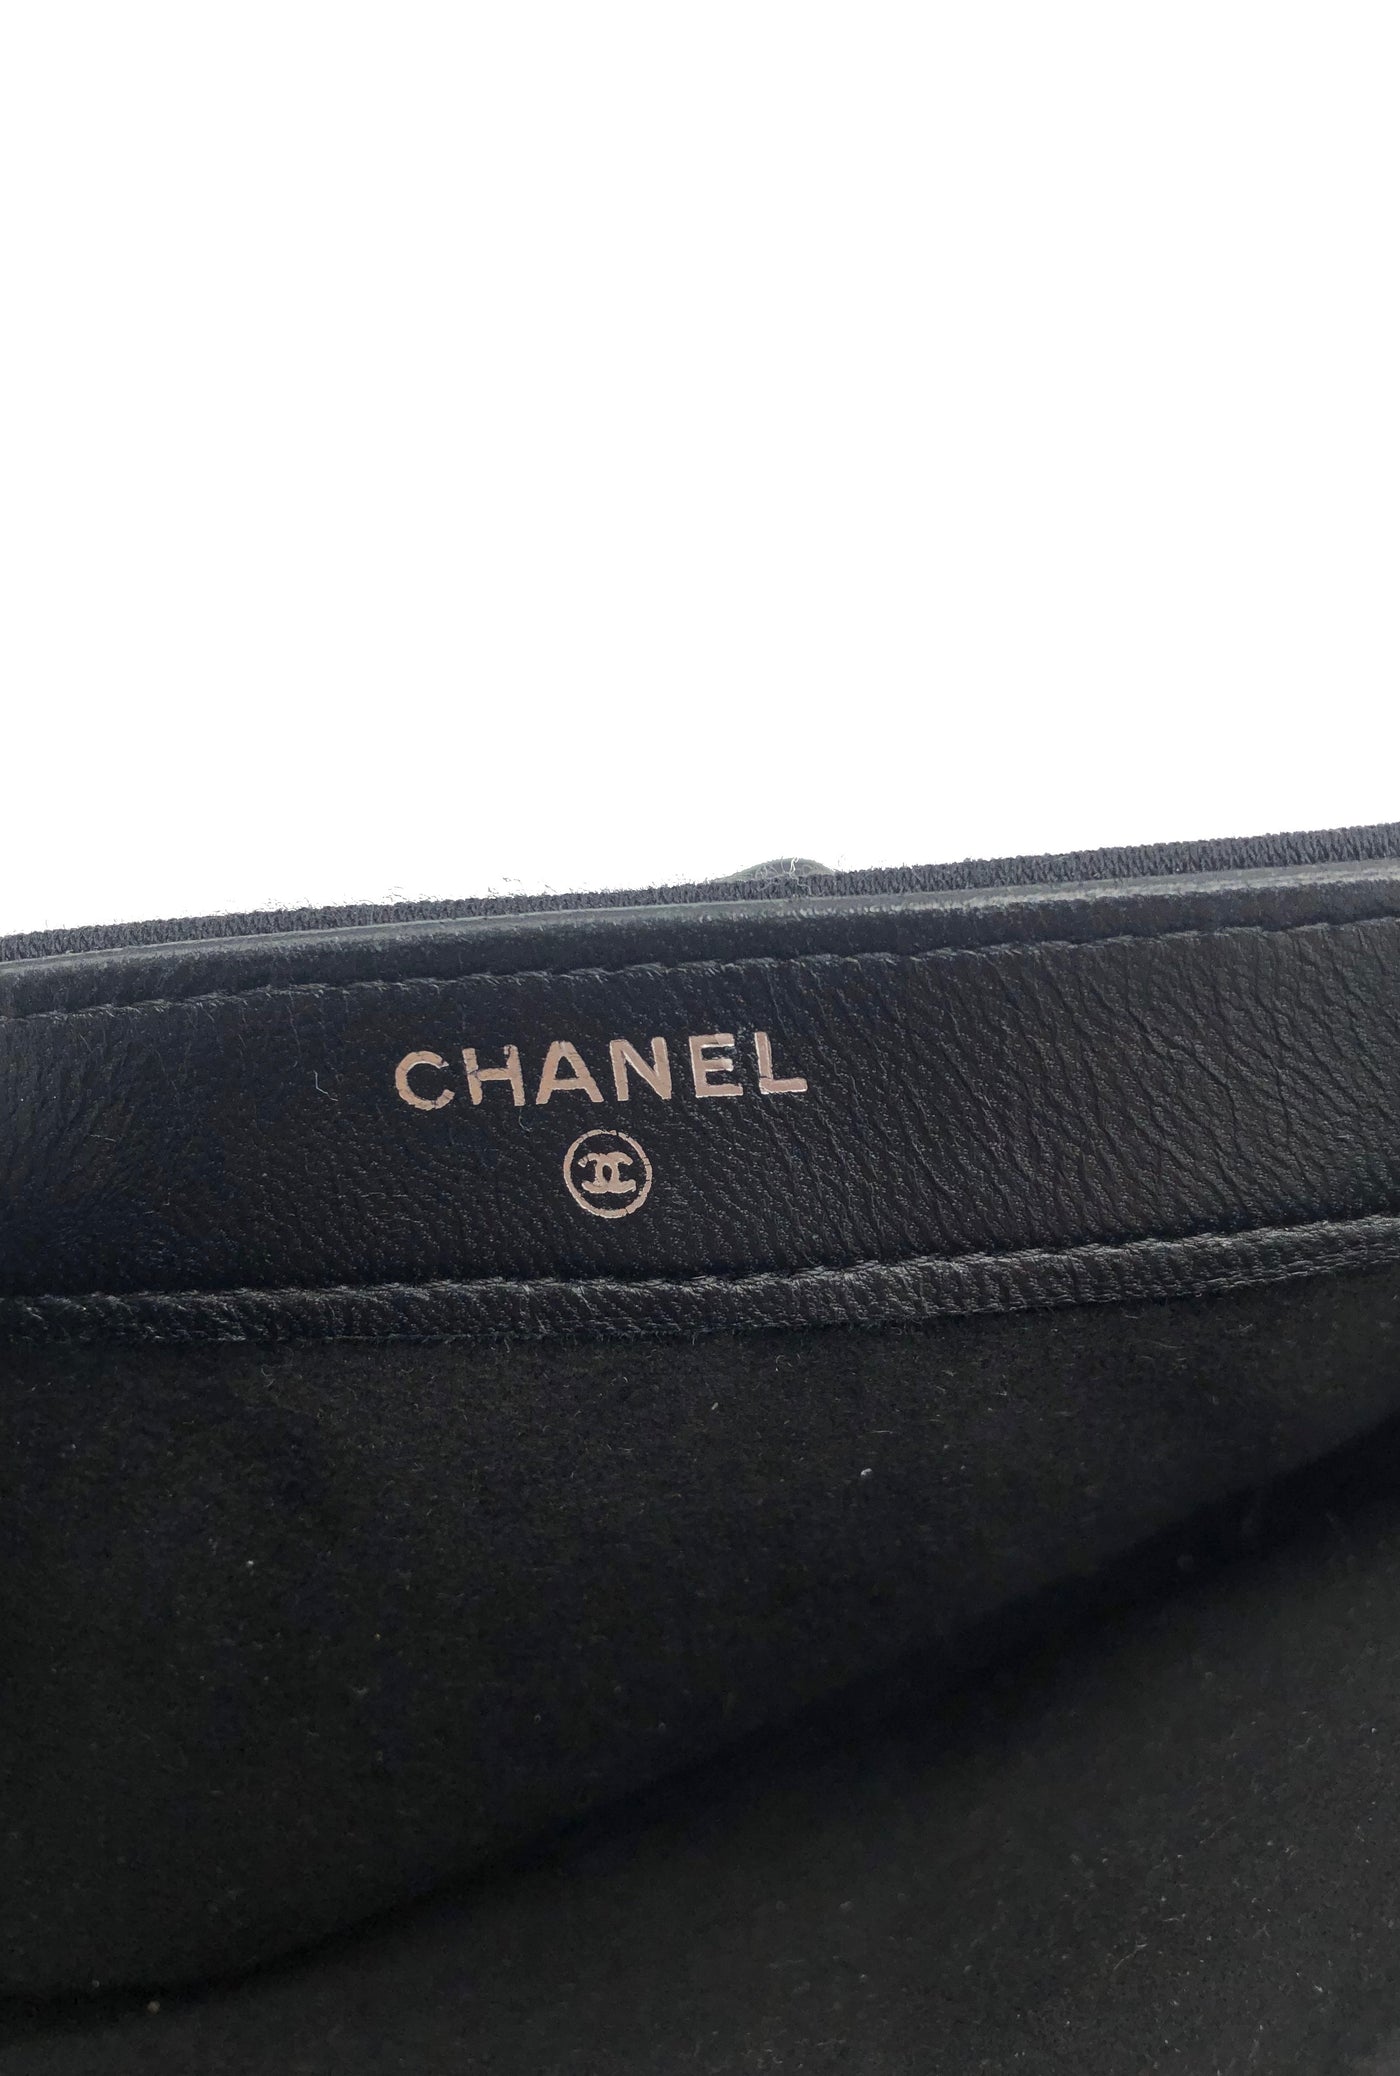 CHANEL Pouch On Chain with ruthenium hardware